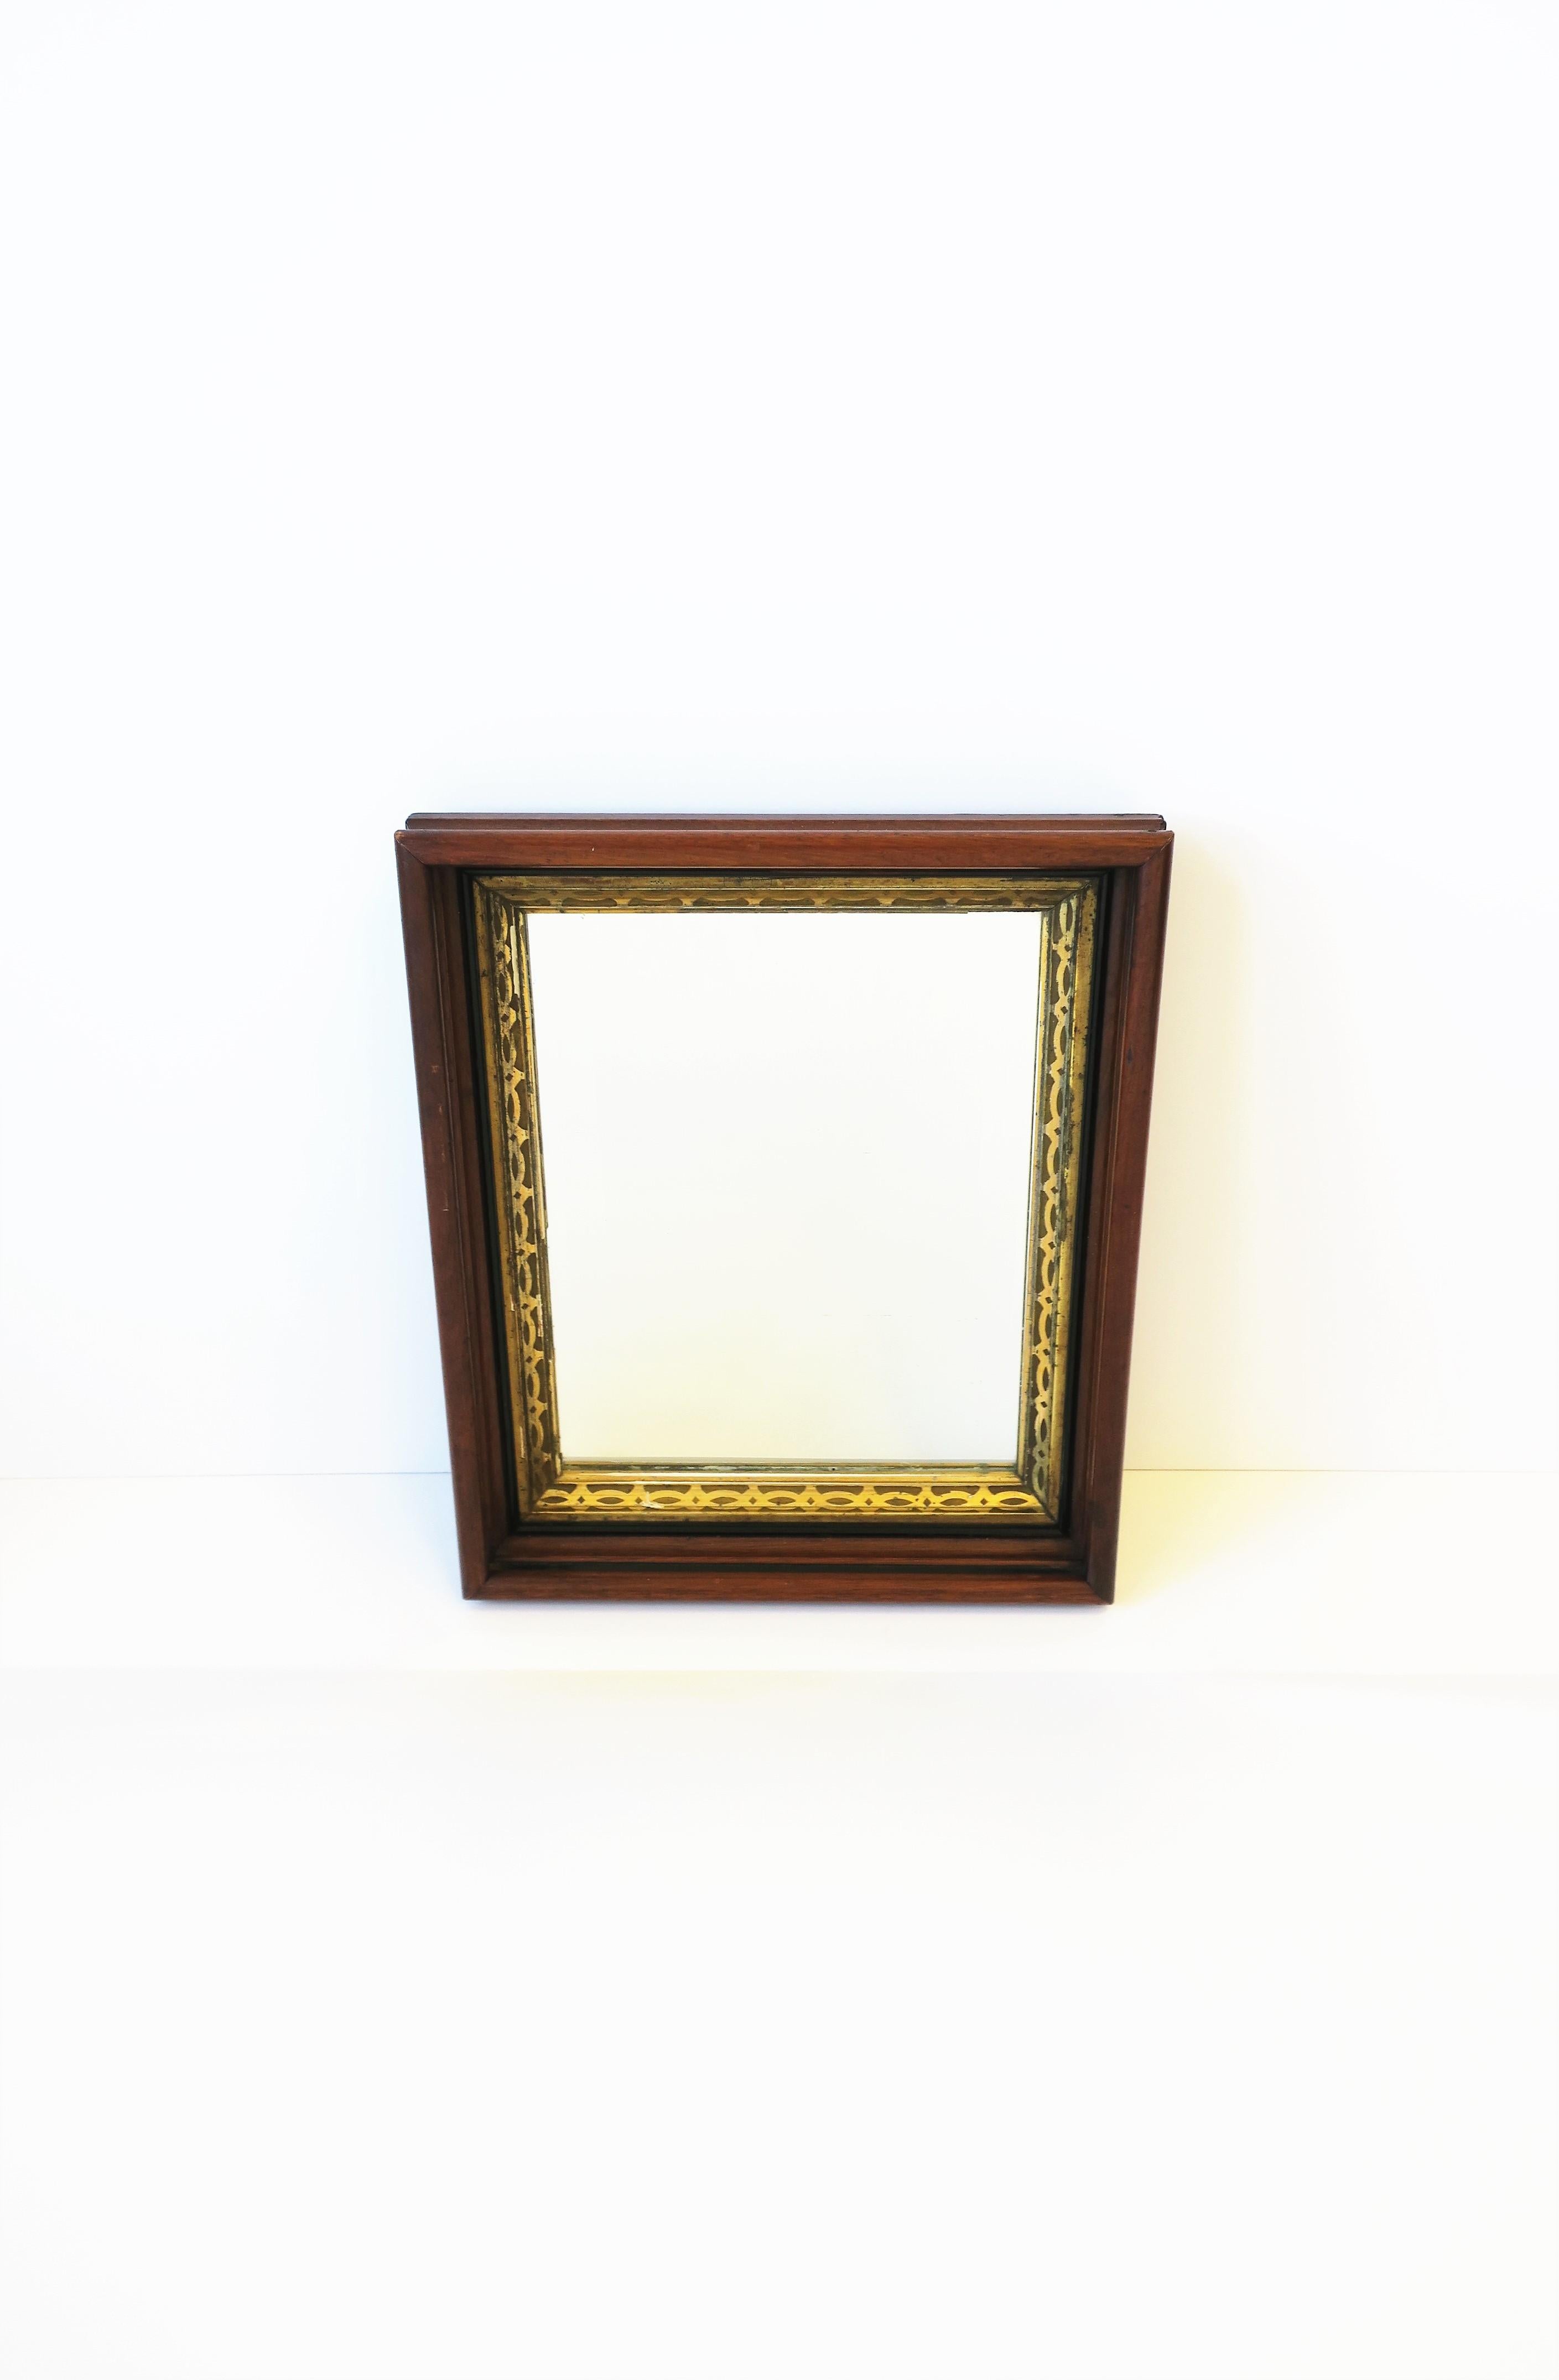 European Wood and Gold Giltwood Framed Wall or Vanity Mirror For Sale